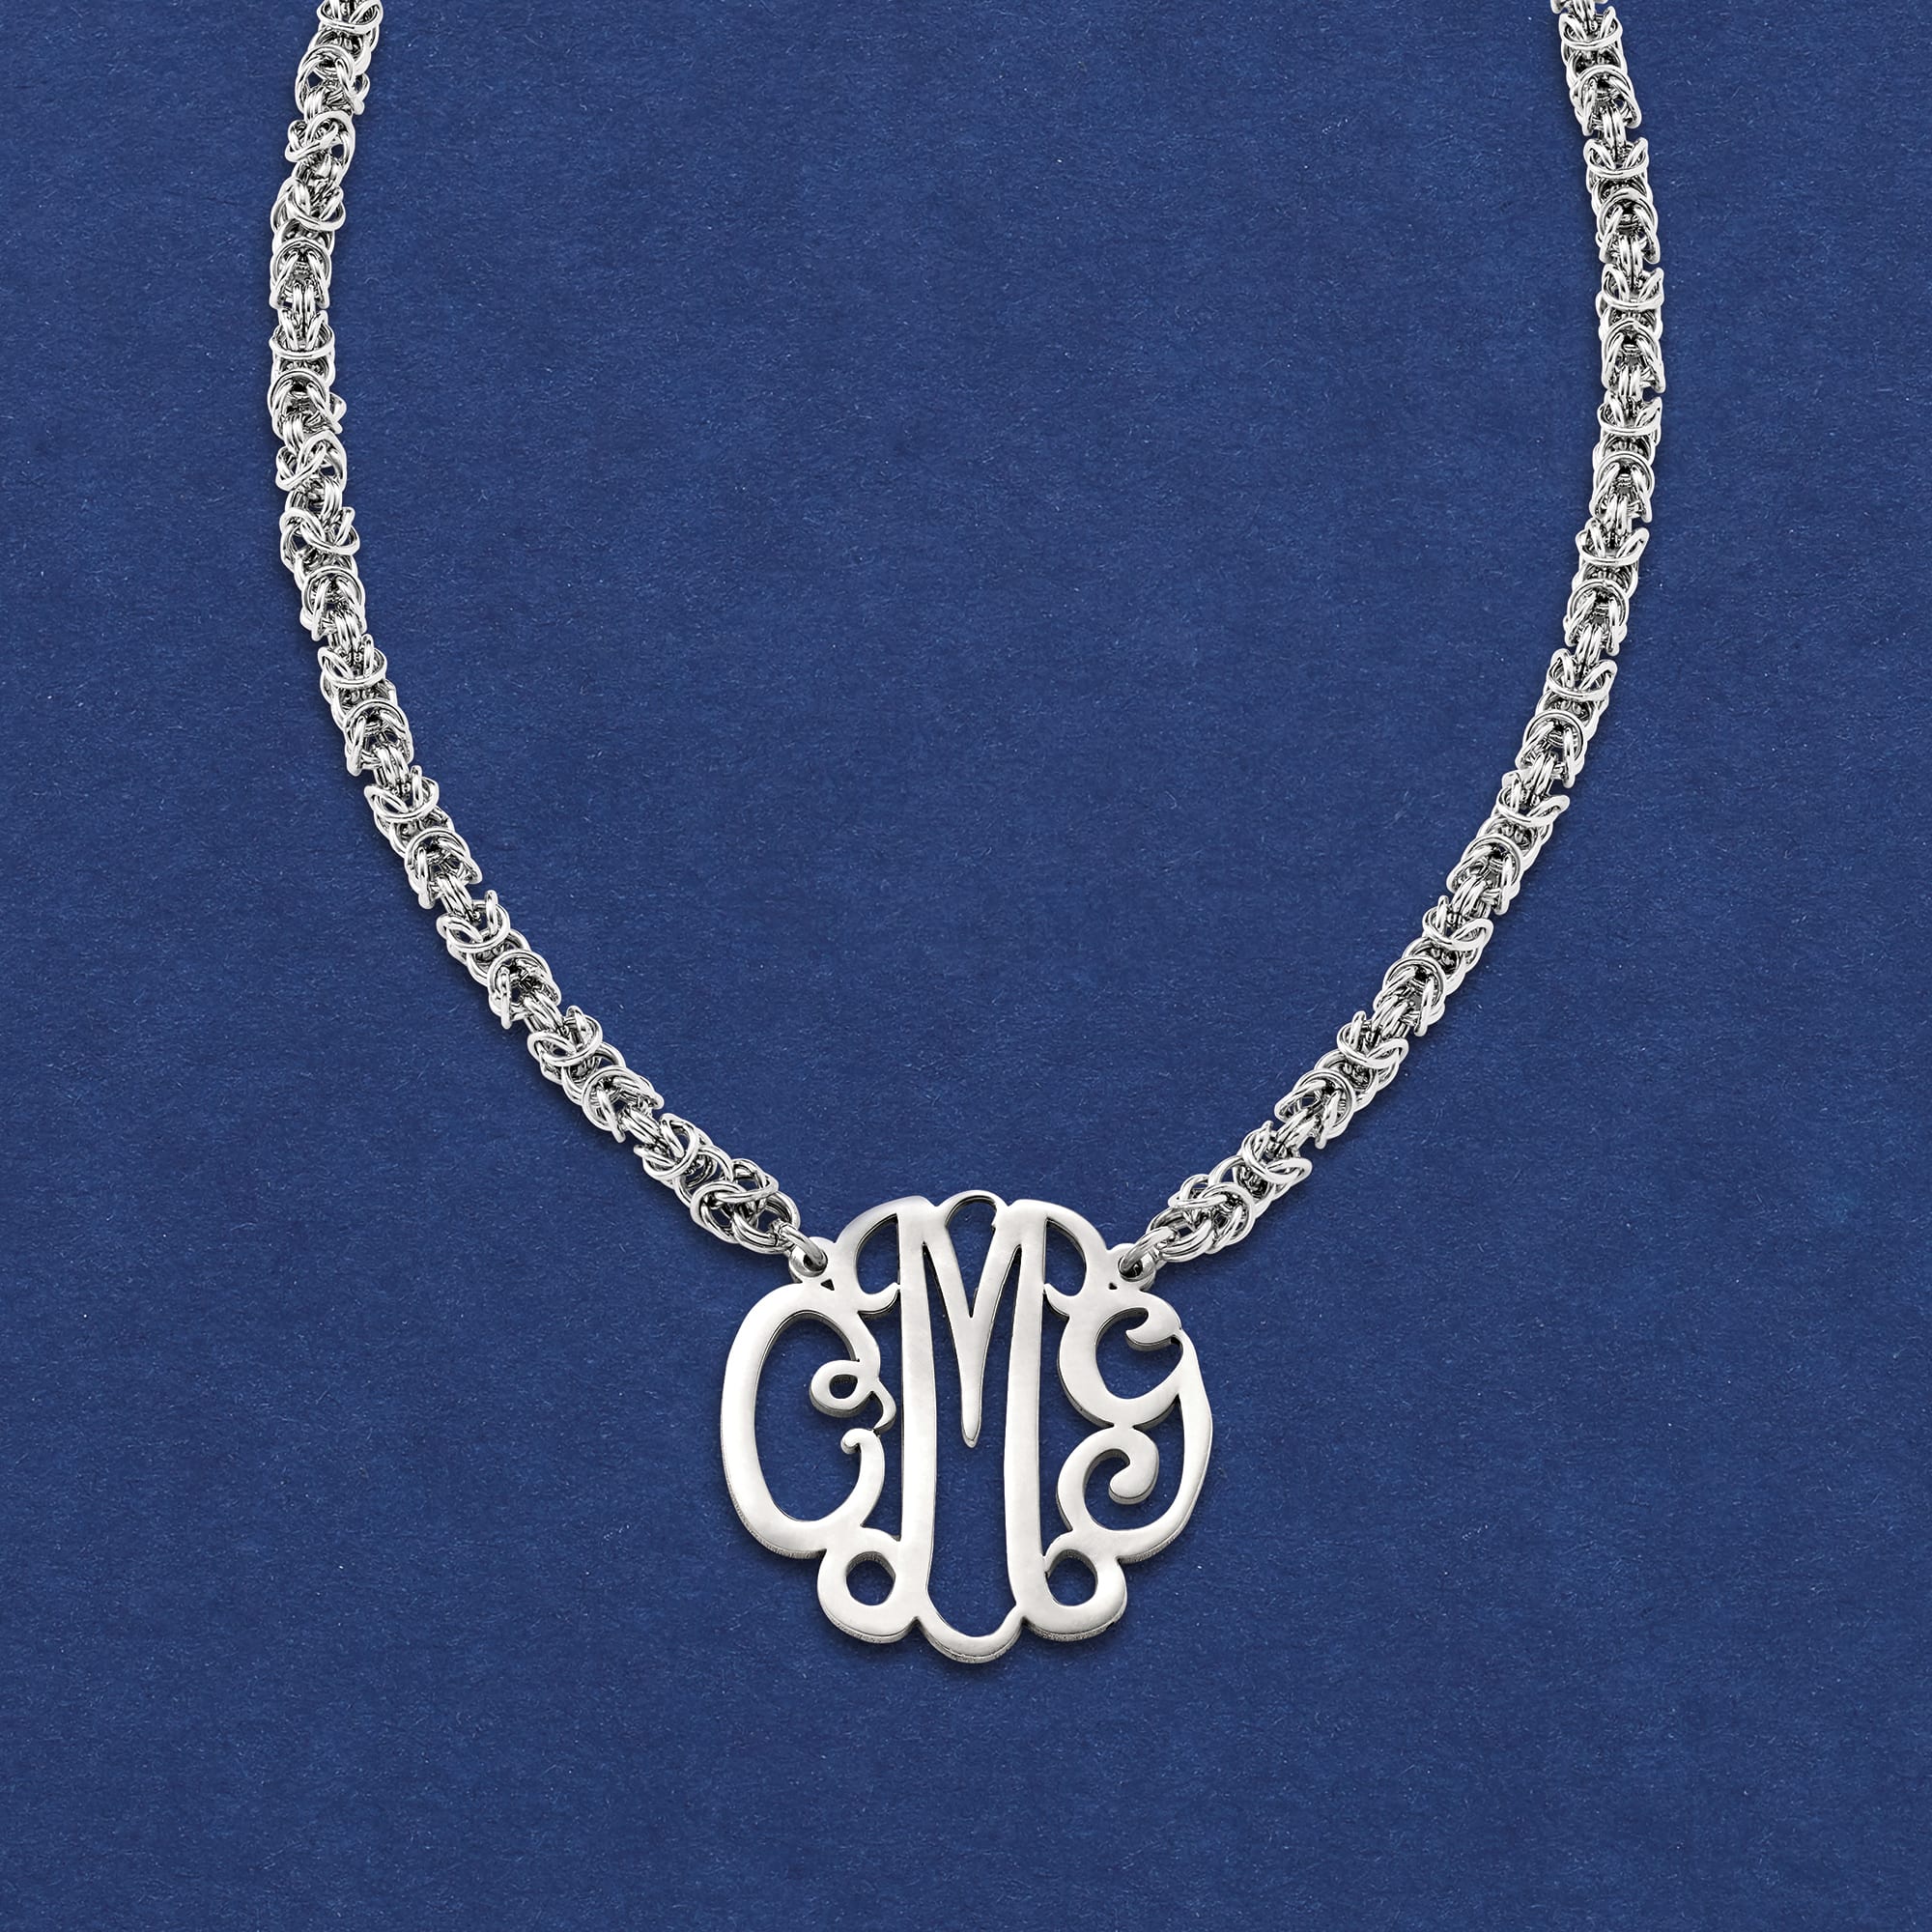 Ross-Simons - Sterling Silver Personalized Monogram Necklace. 18